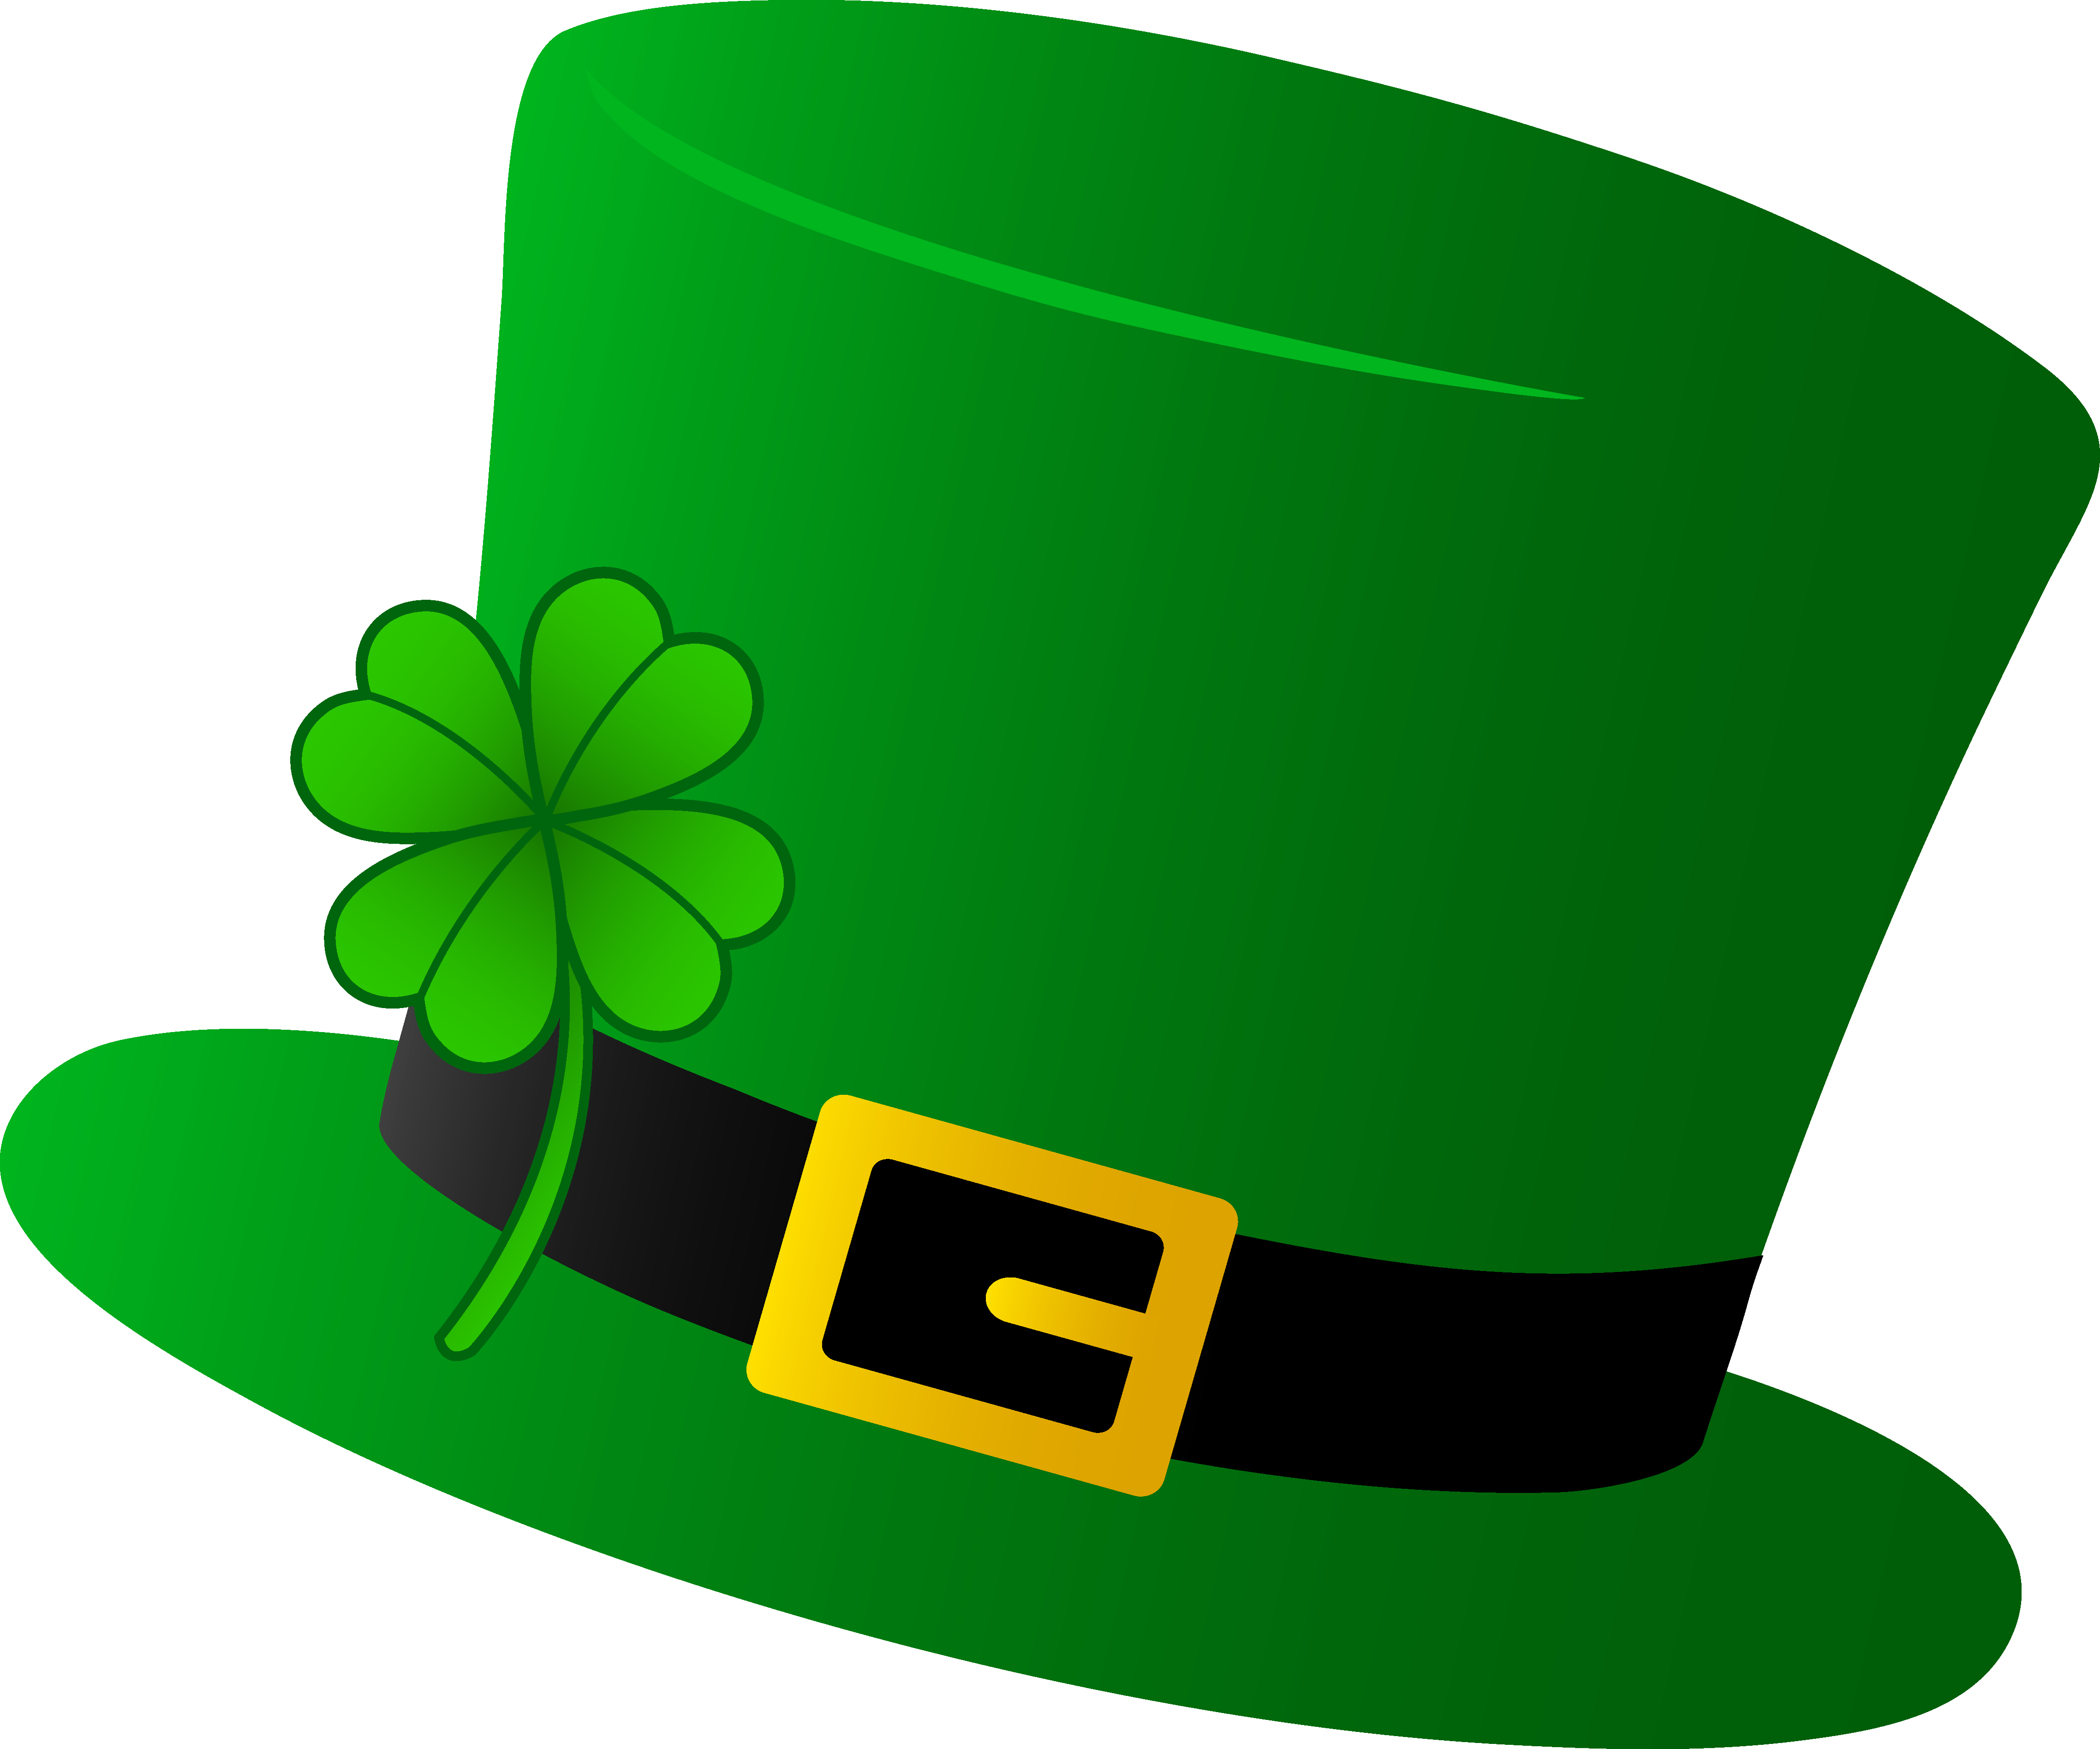 St Patrick S Day hat drawing free image download